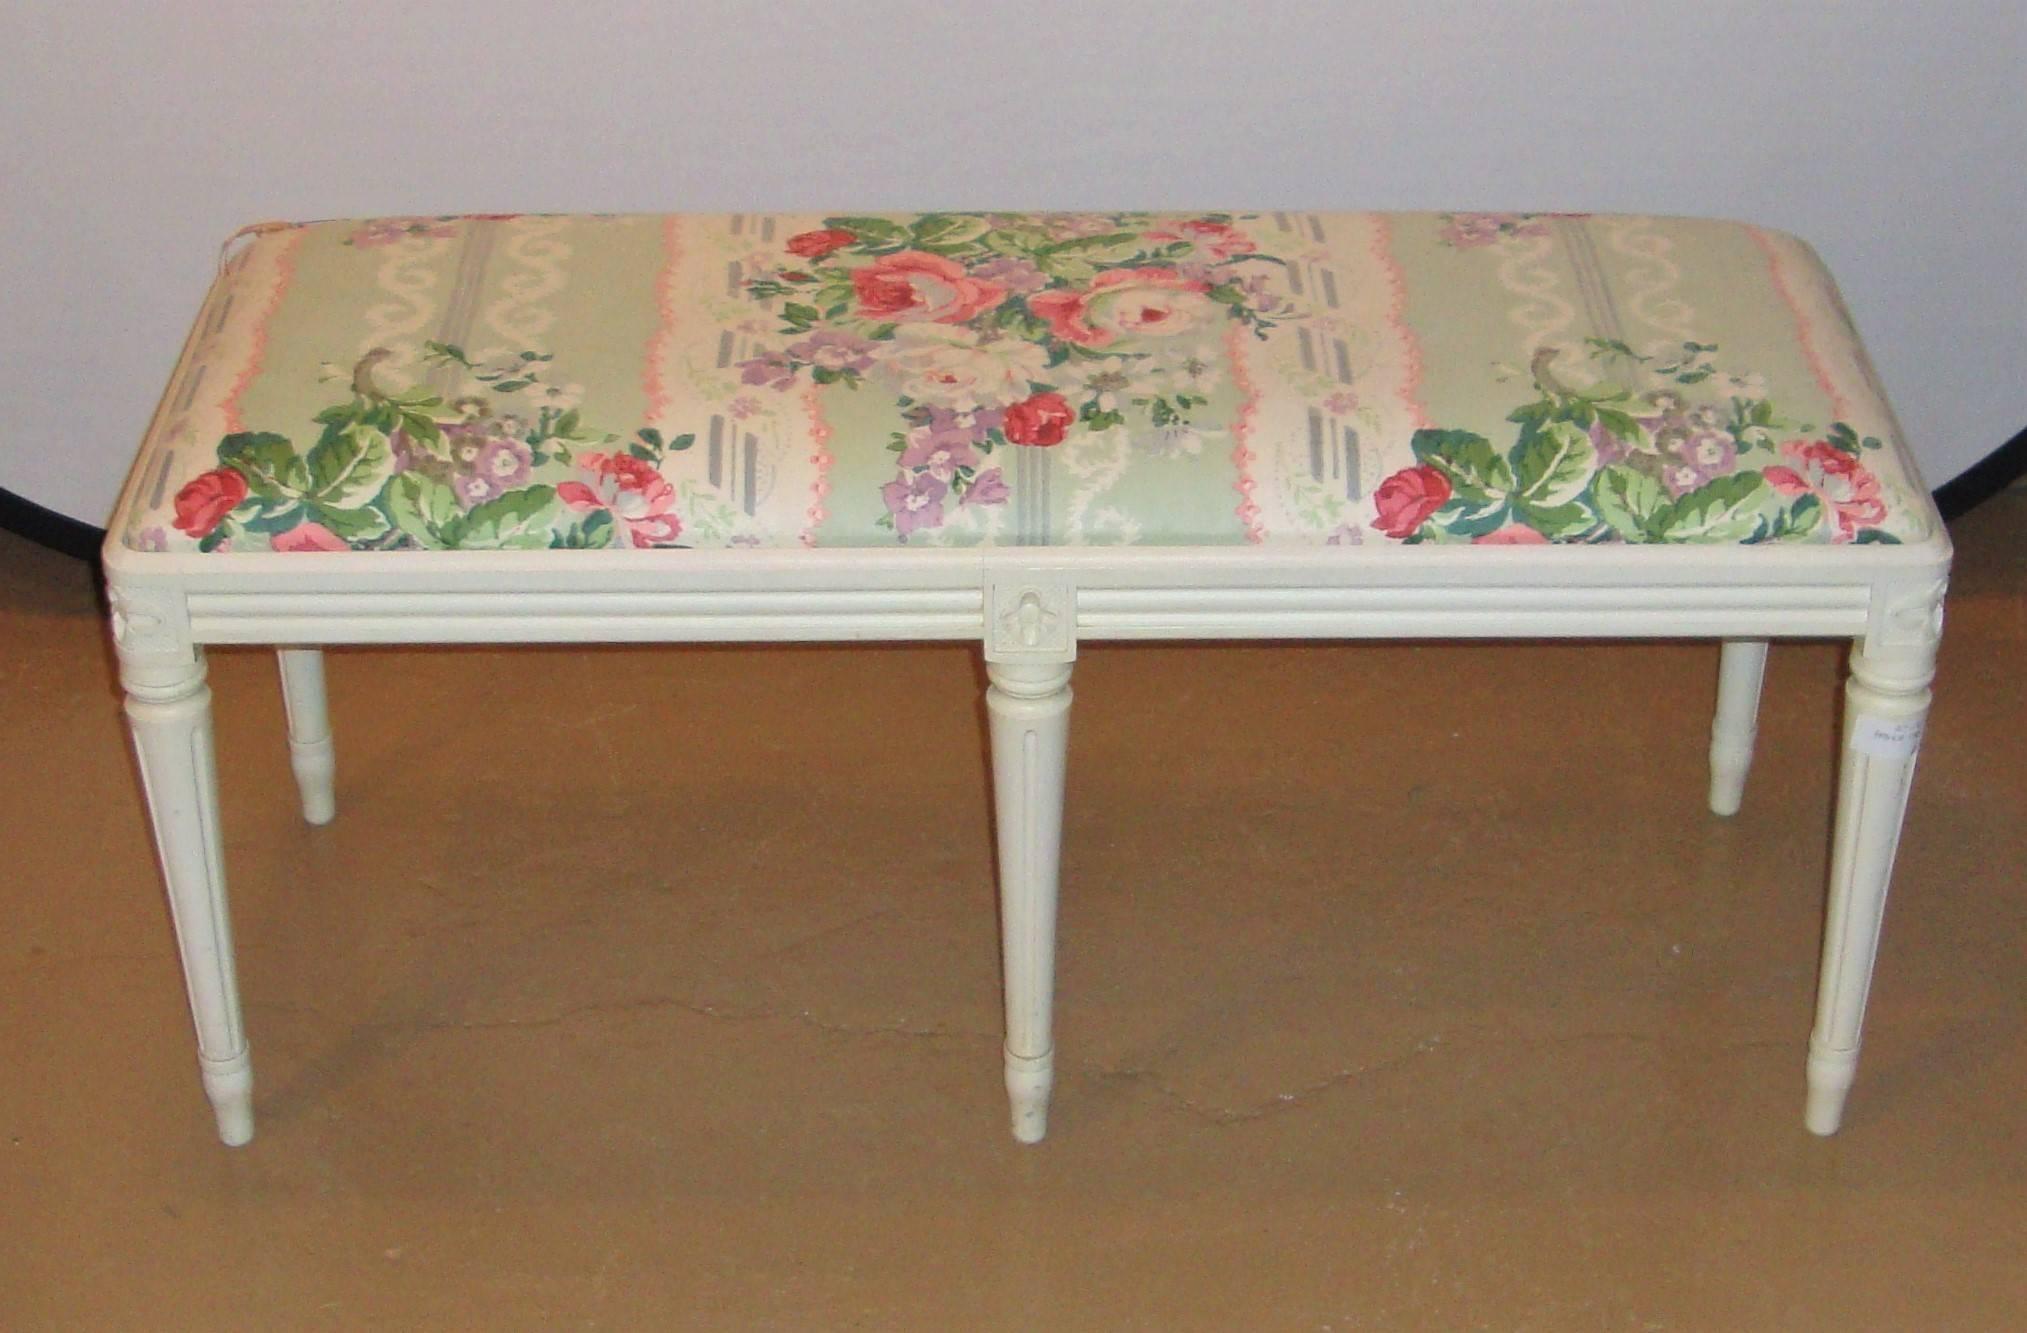 Louis XVI Style Paint Decorated Window Bench. An off-white painted window bench fashioned in the Louis XVI Style. The six legged bench or footstool having a nice floral upholstered stuffed seat. Great for use as a piano bench.